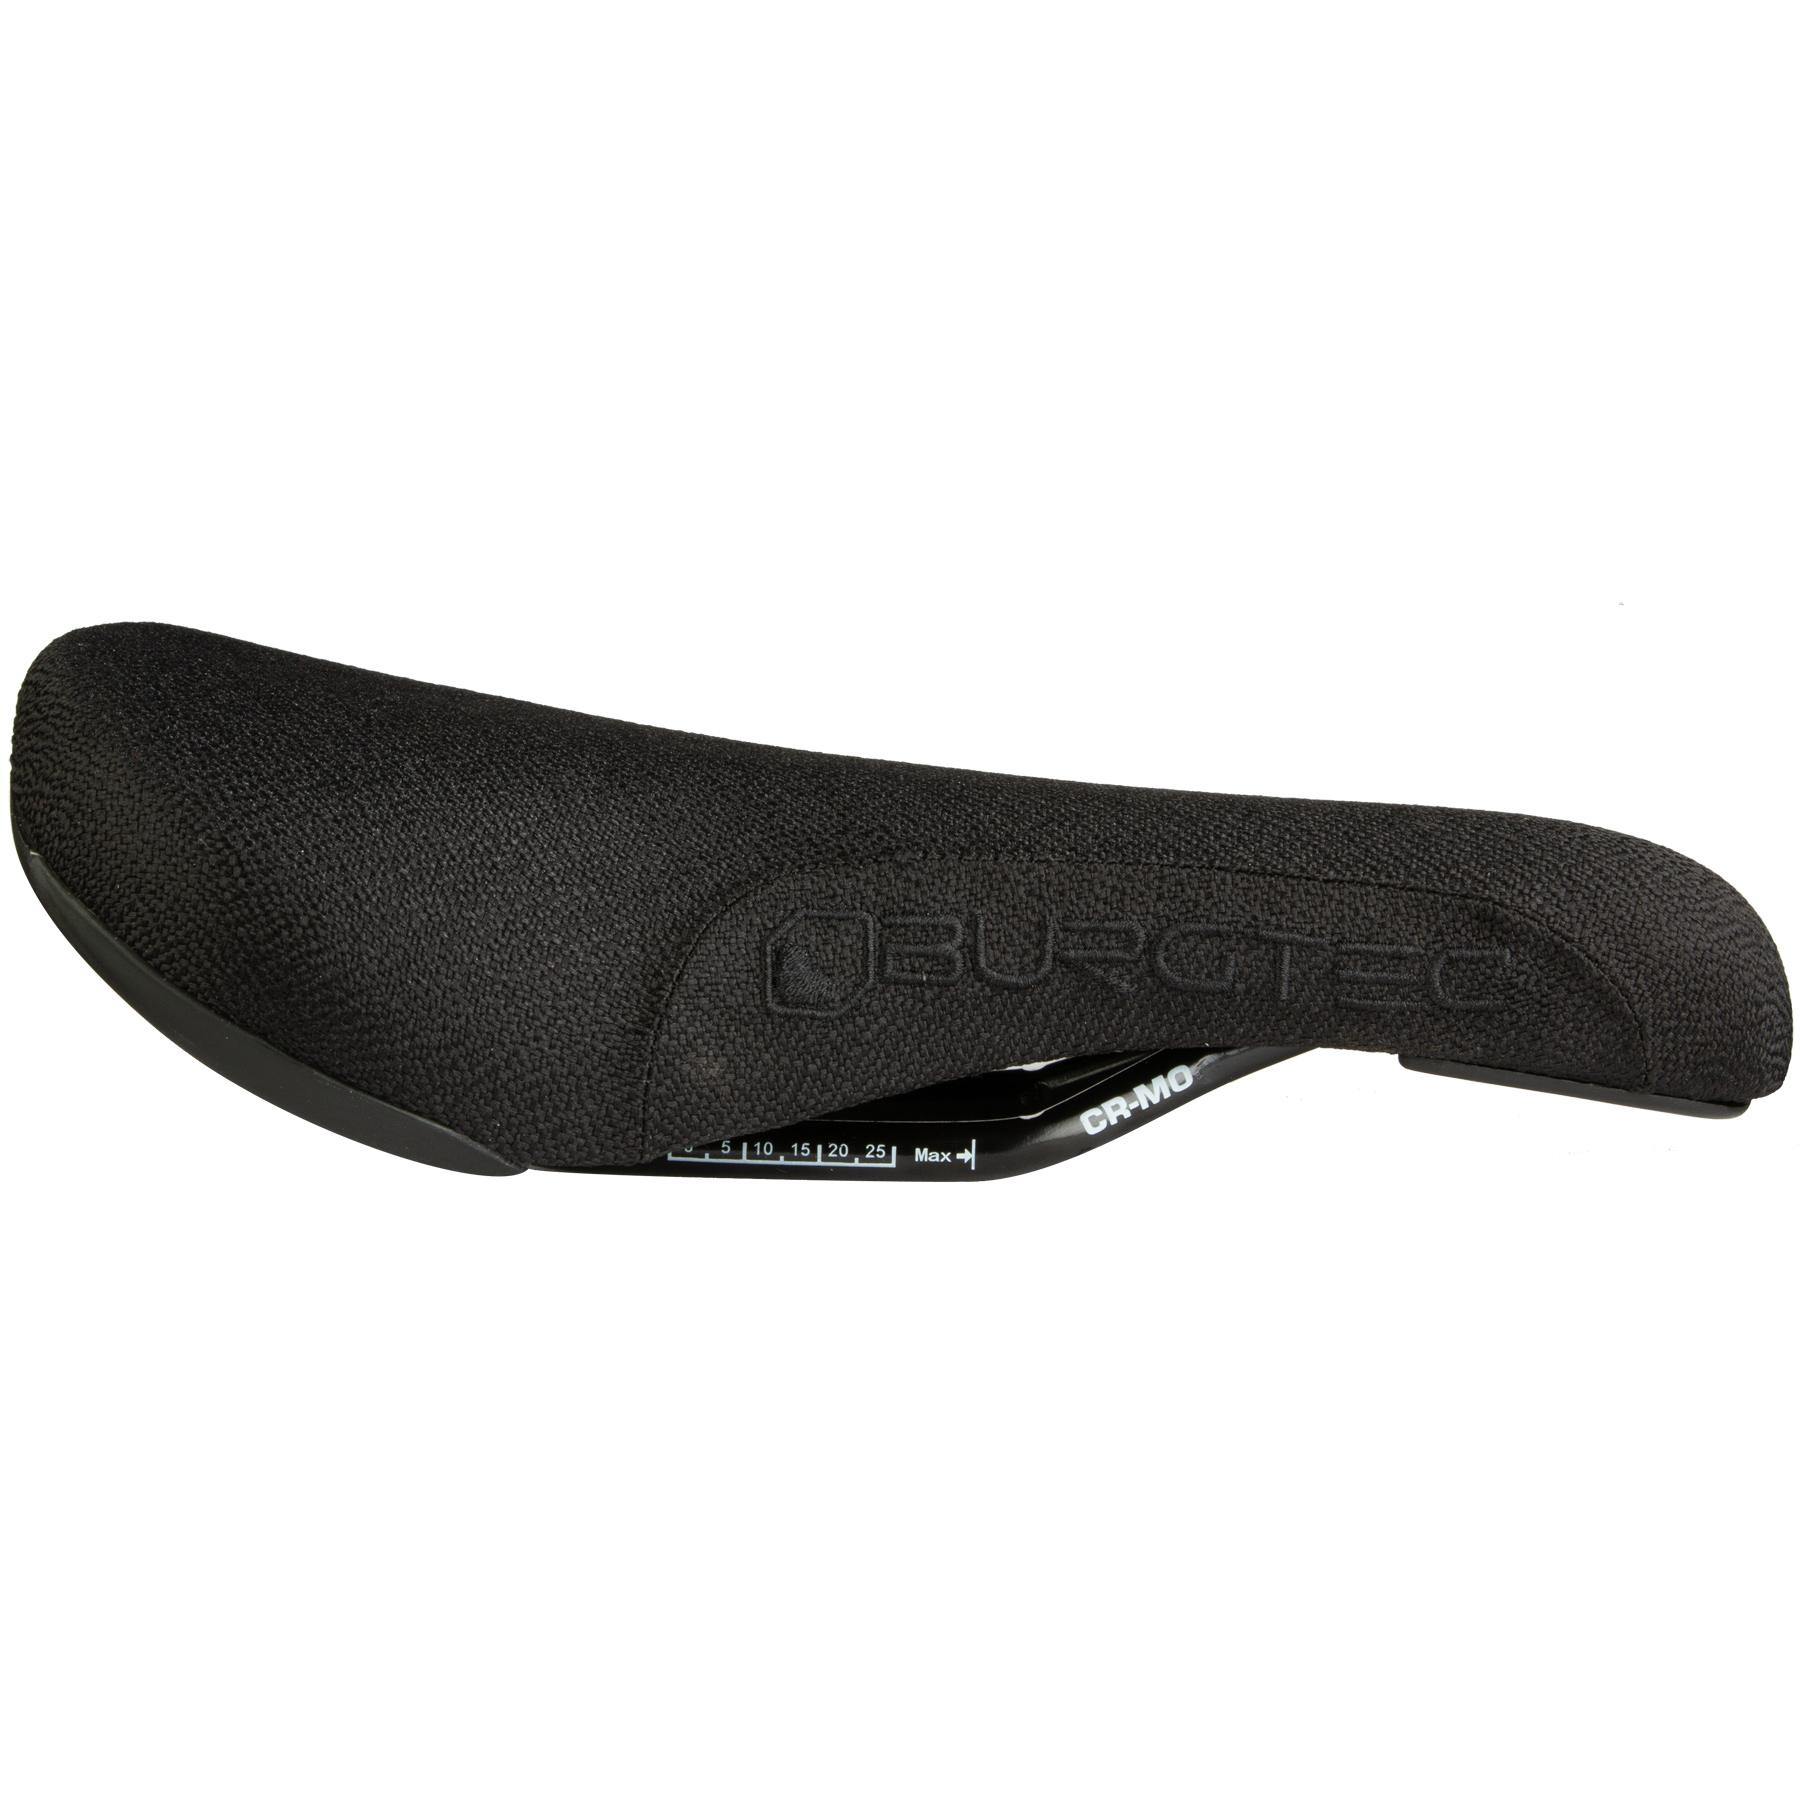 Picture of Burgtec The Cloud Boost Saddle - Black on Black